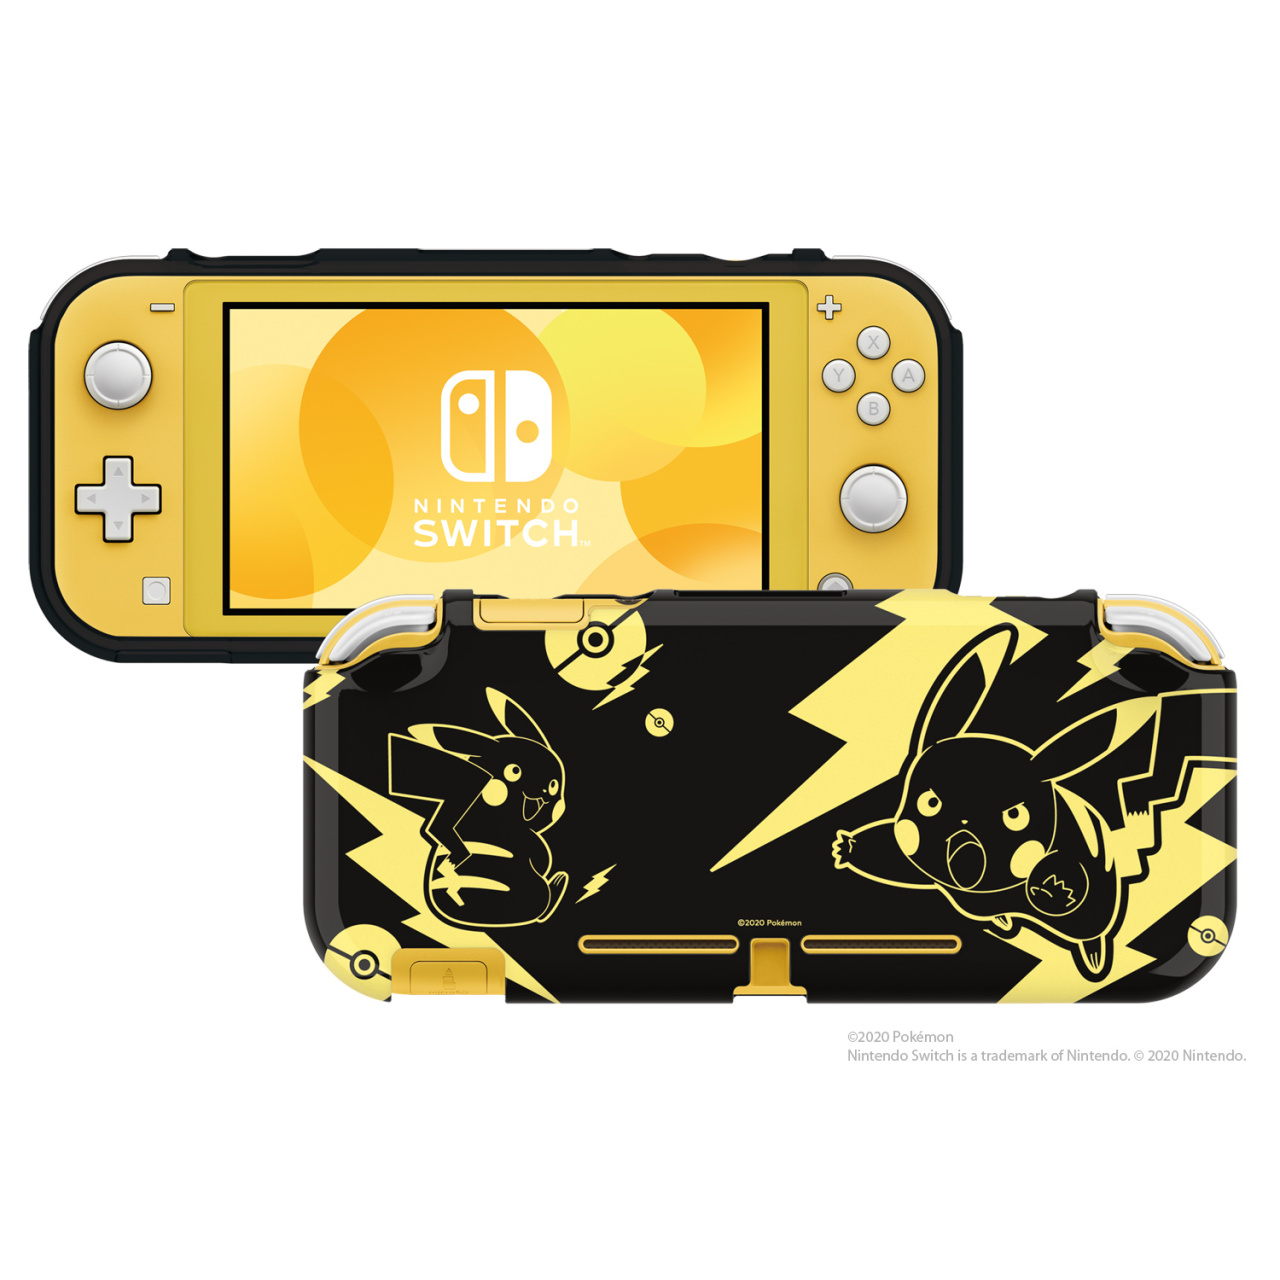 Protection Manette Switch Pokemon HORI D-PAD